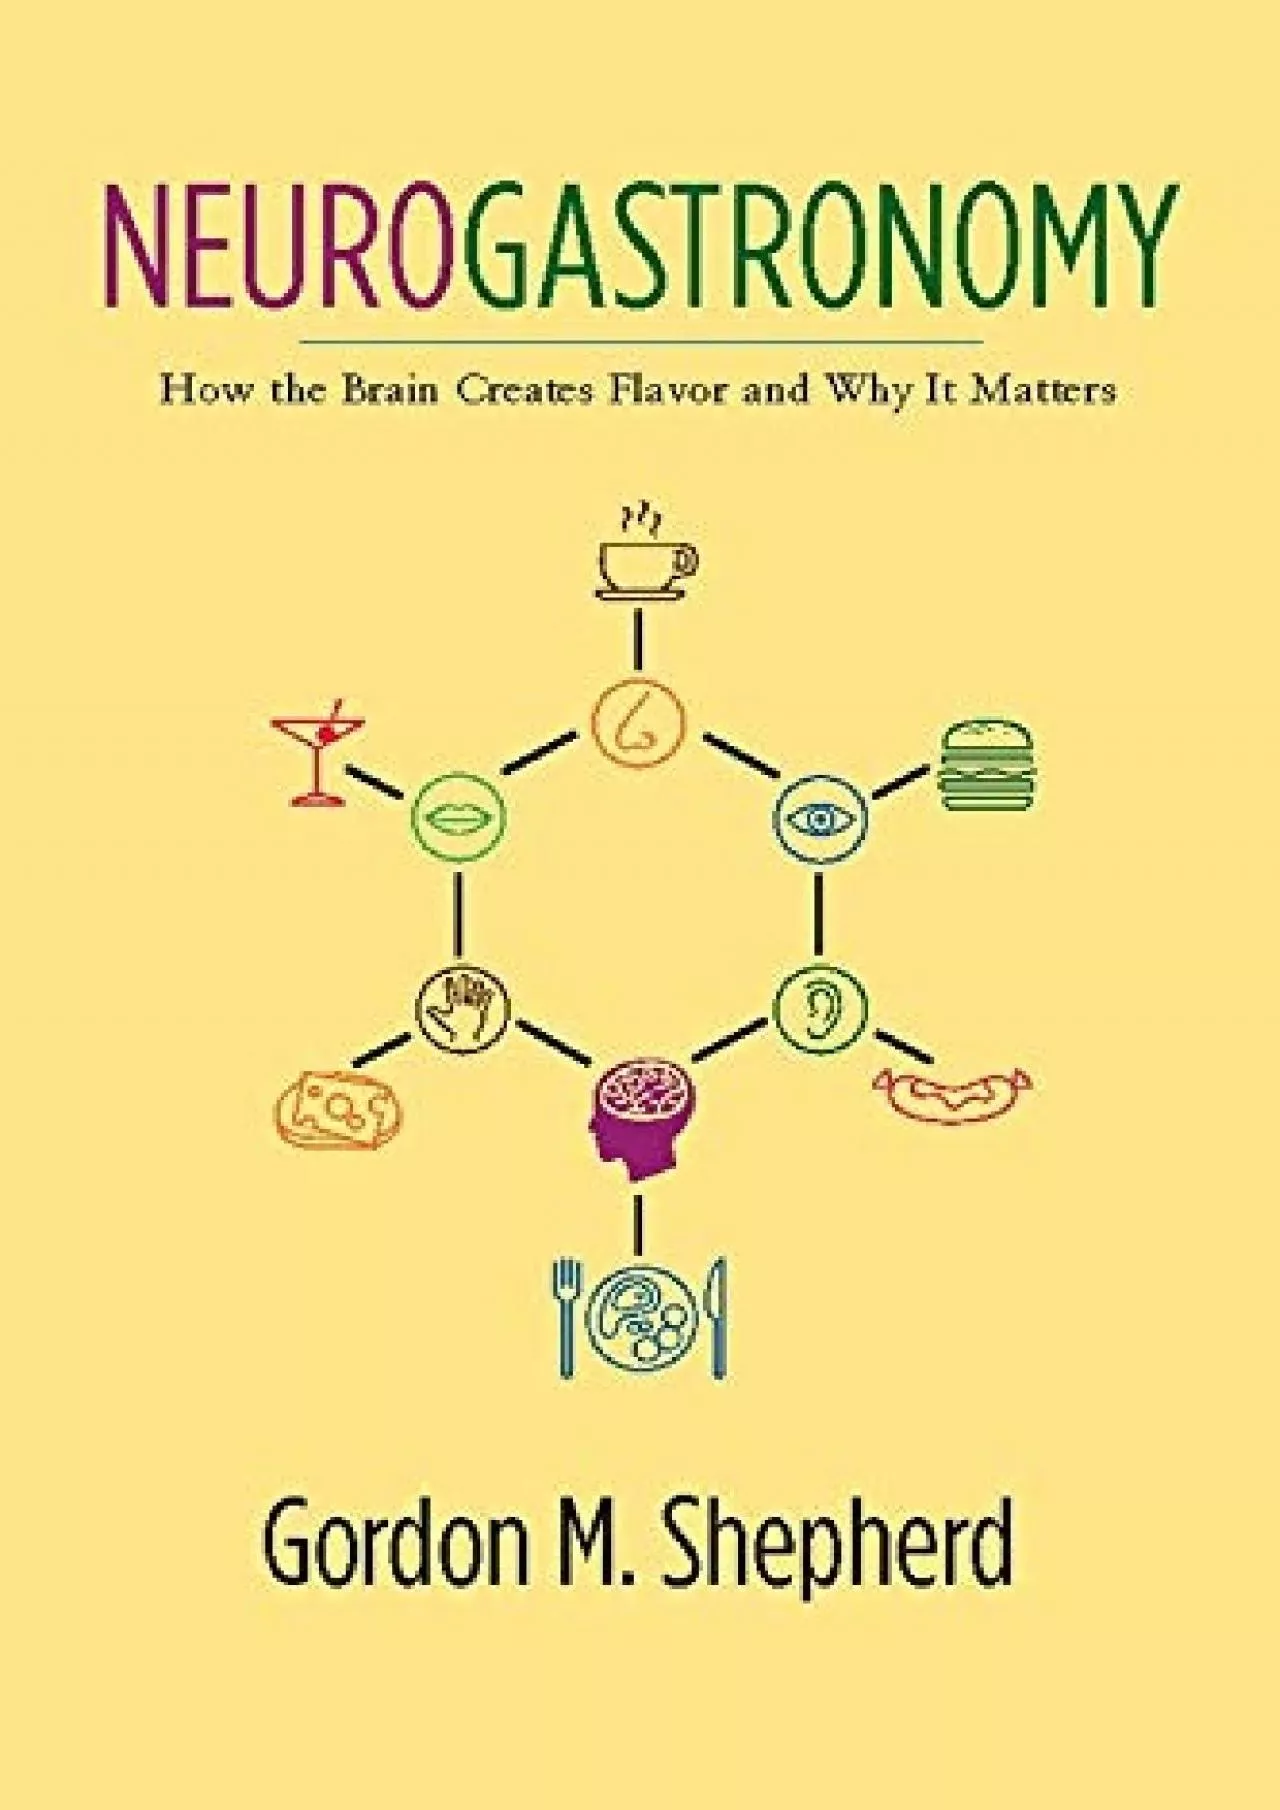 (DOWNLOAD)-Neurogastronomy: How the Brain Creates Flavor and Why It Matters